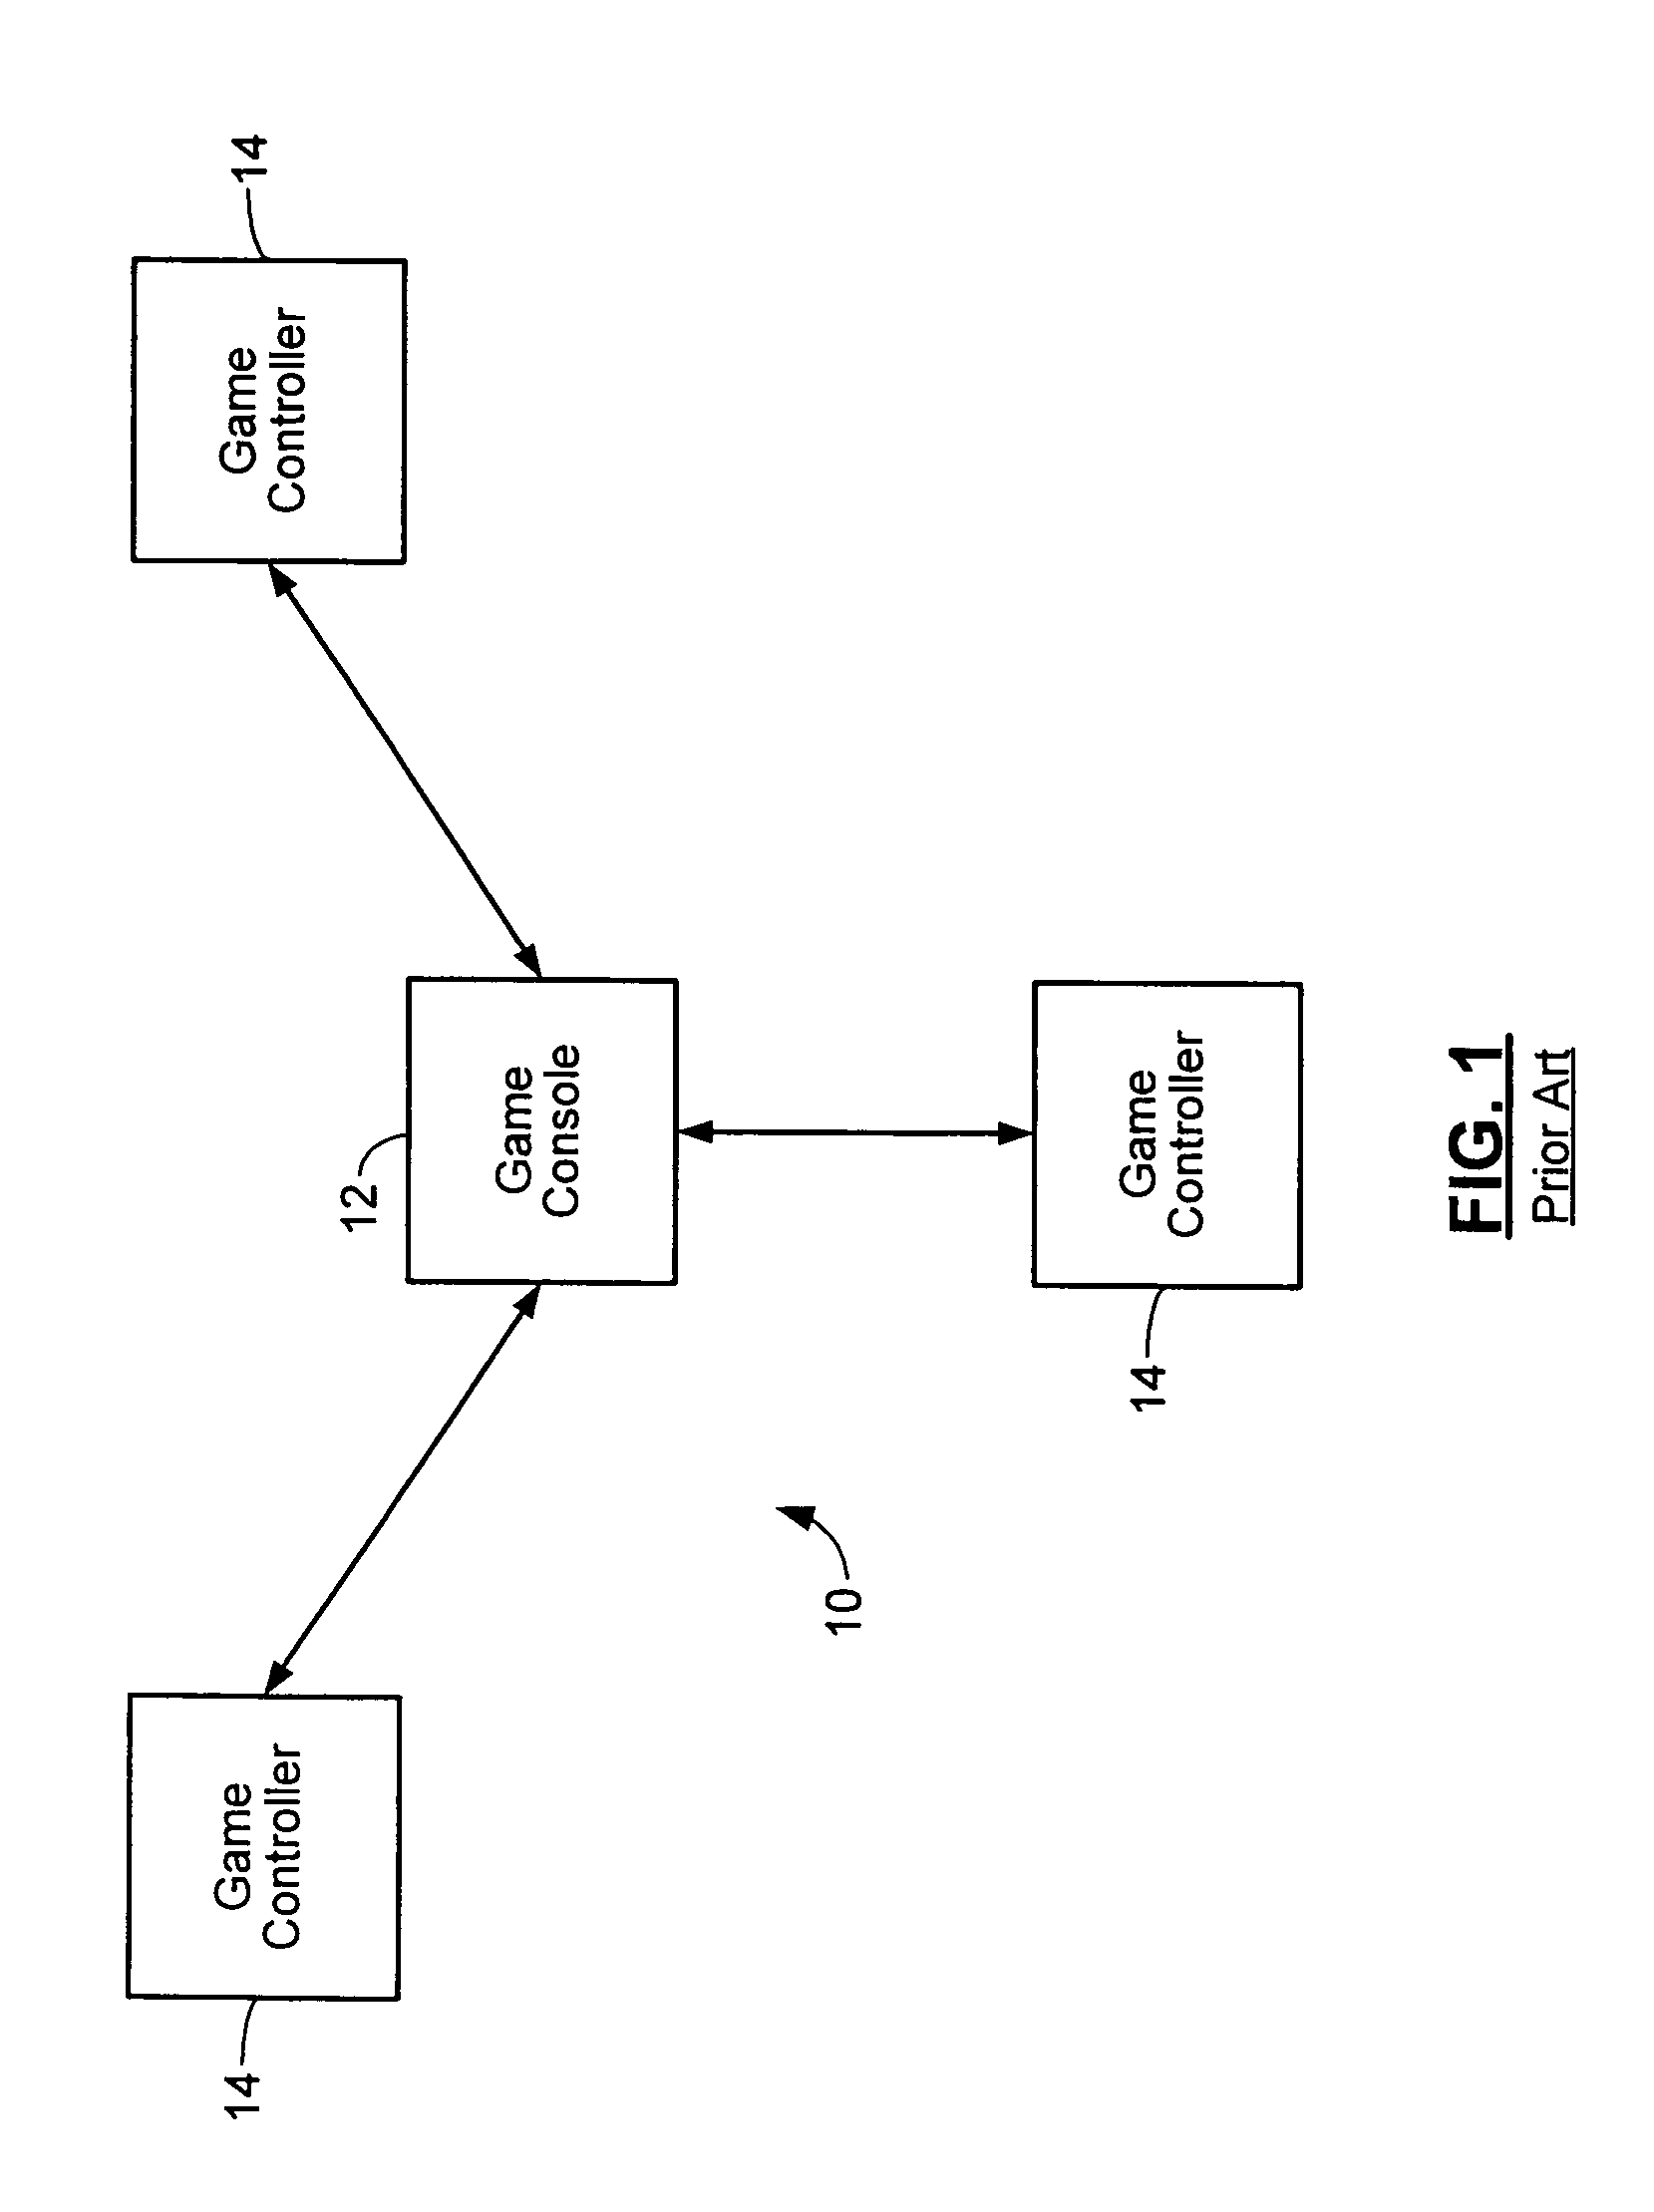 Wireless local area network infrastructure mode for reducing power consumption